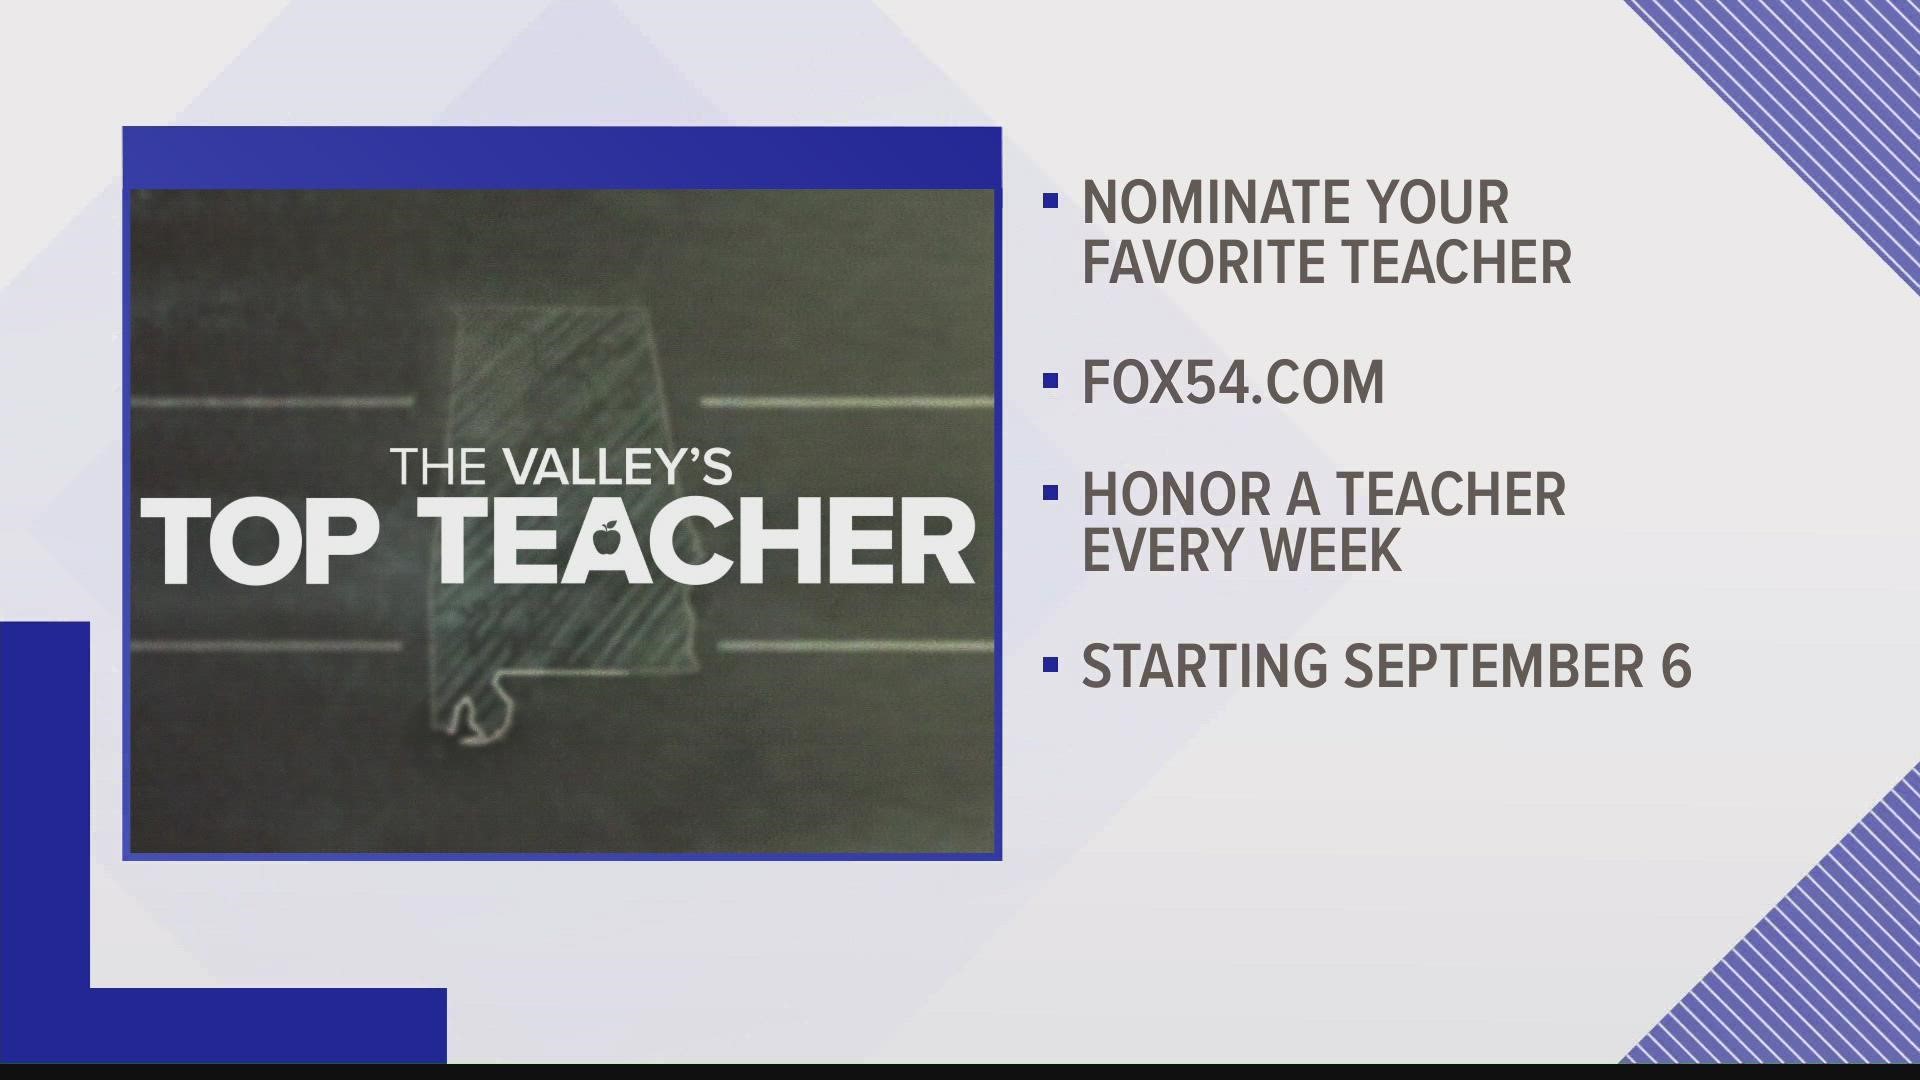 Now that the kids are back in class, it's that time to start nominating the great teacher in your child's life. Our first Valley's Top Teacher airs September 6th.